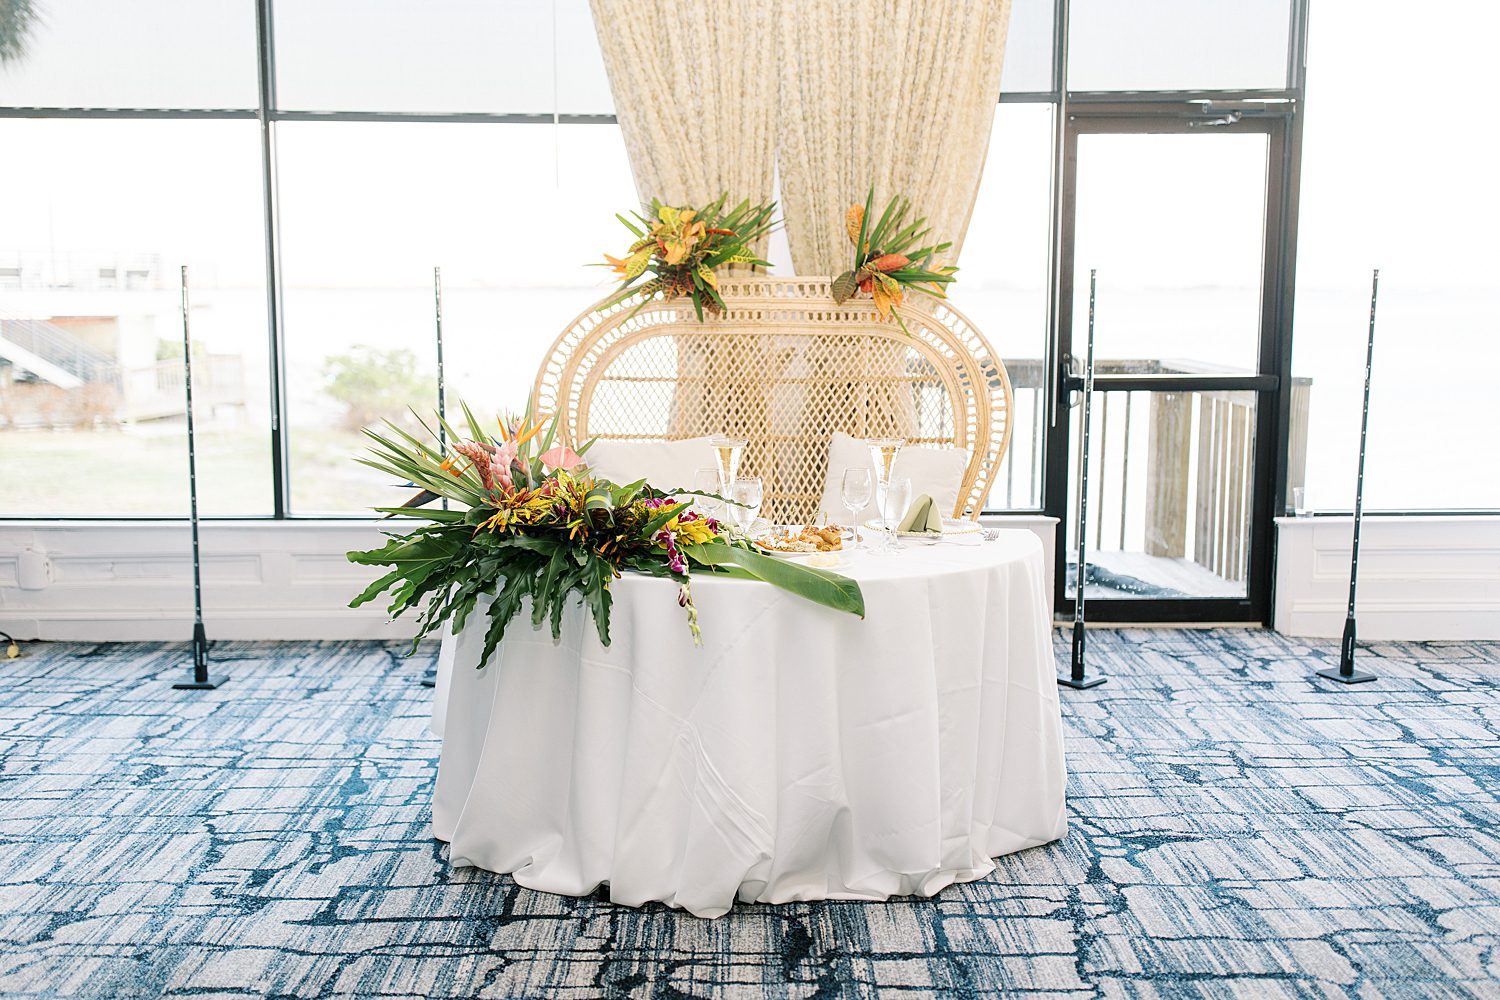 sweetheart table with wicker chair and tropical plants on edge of table 